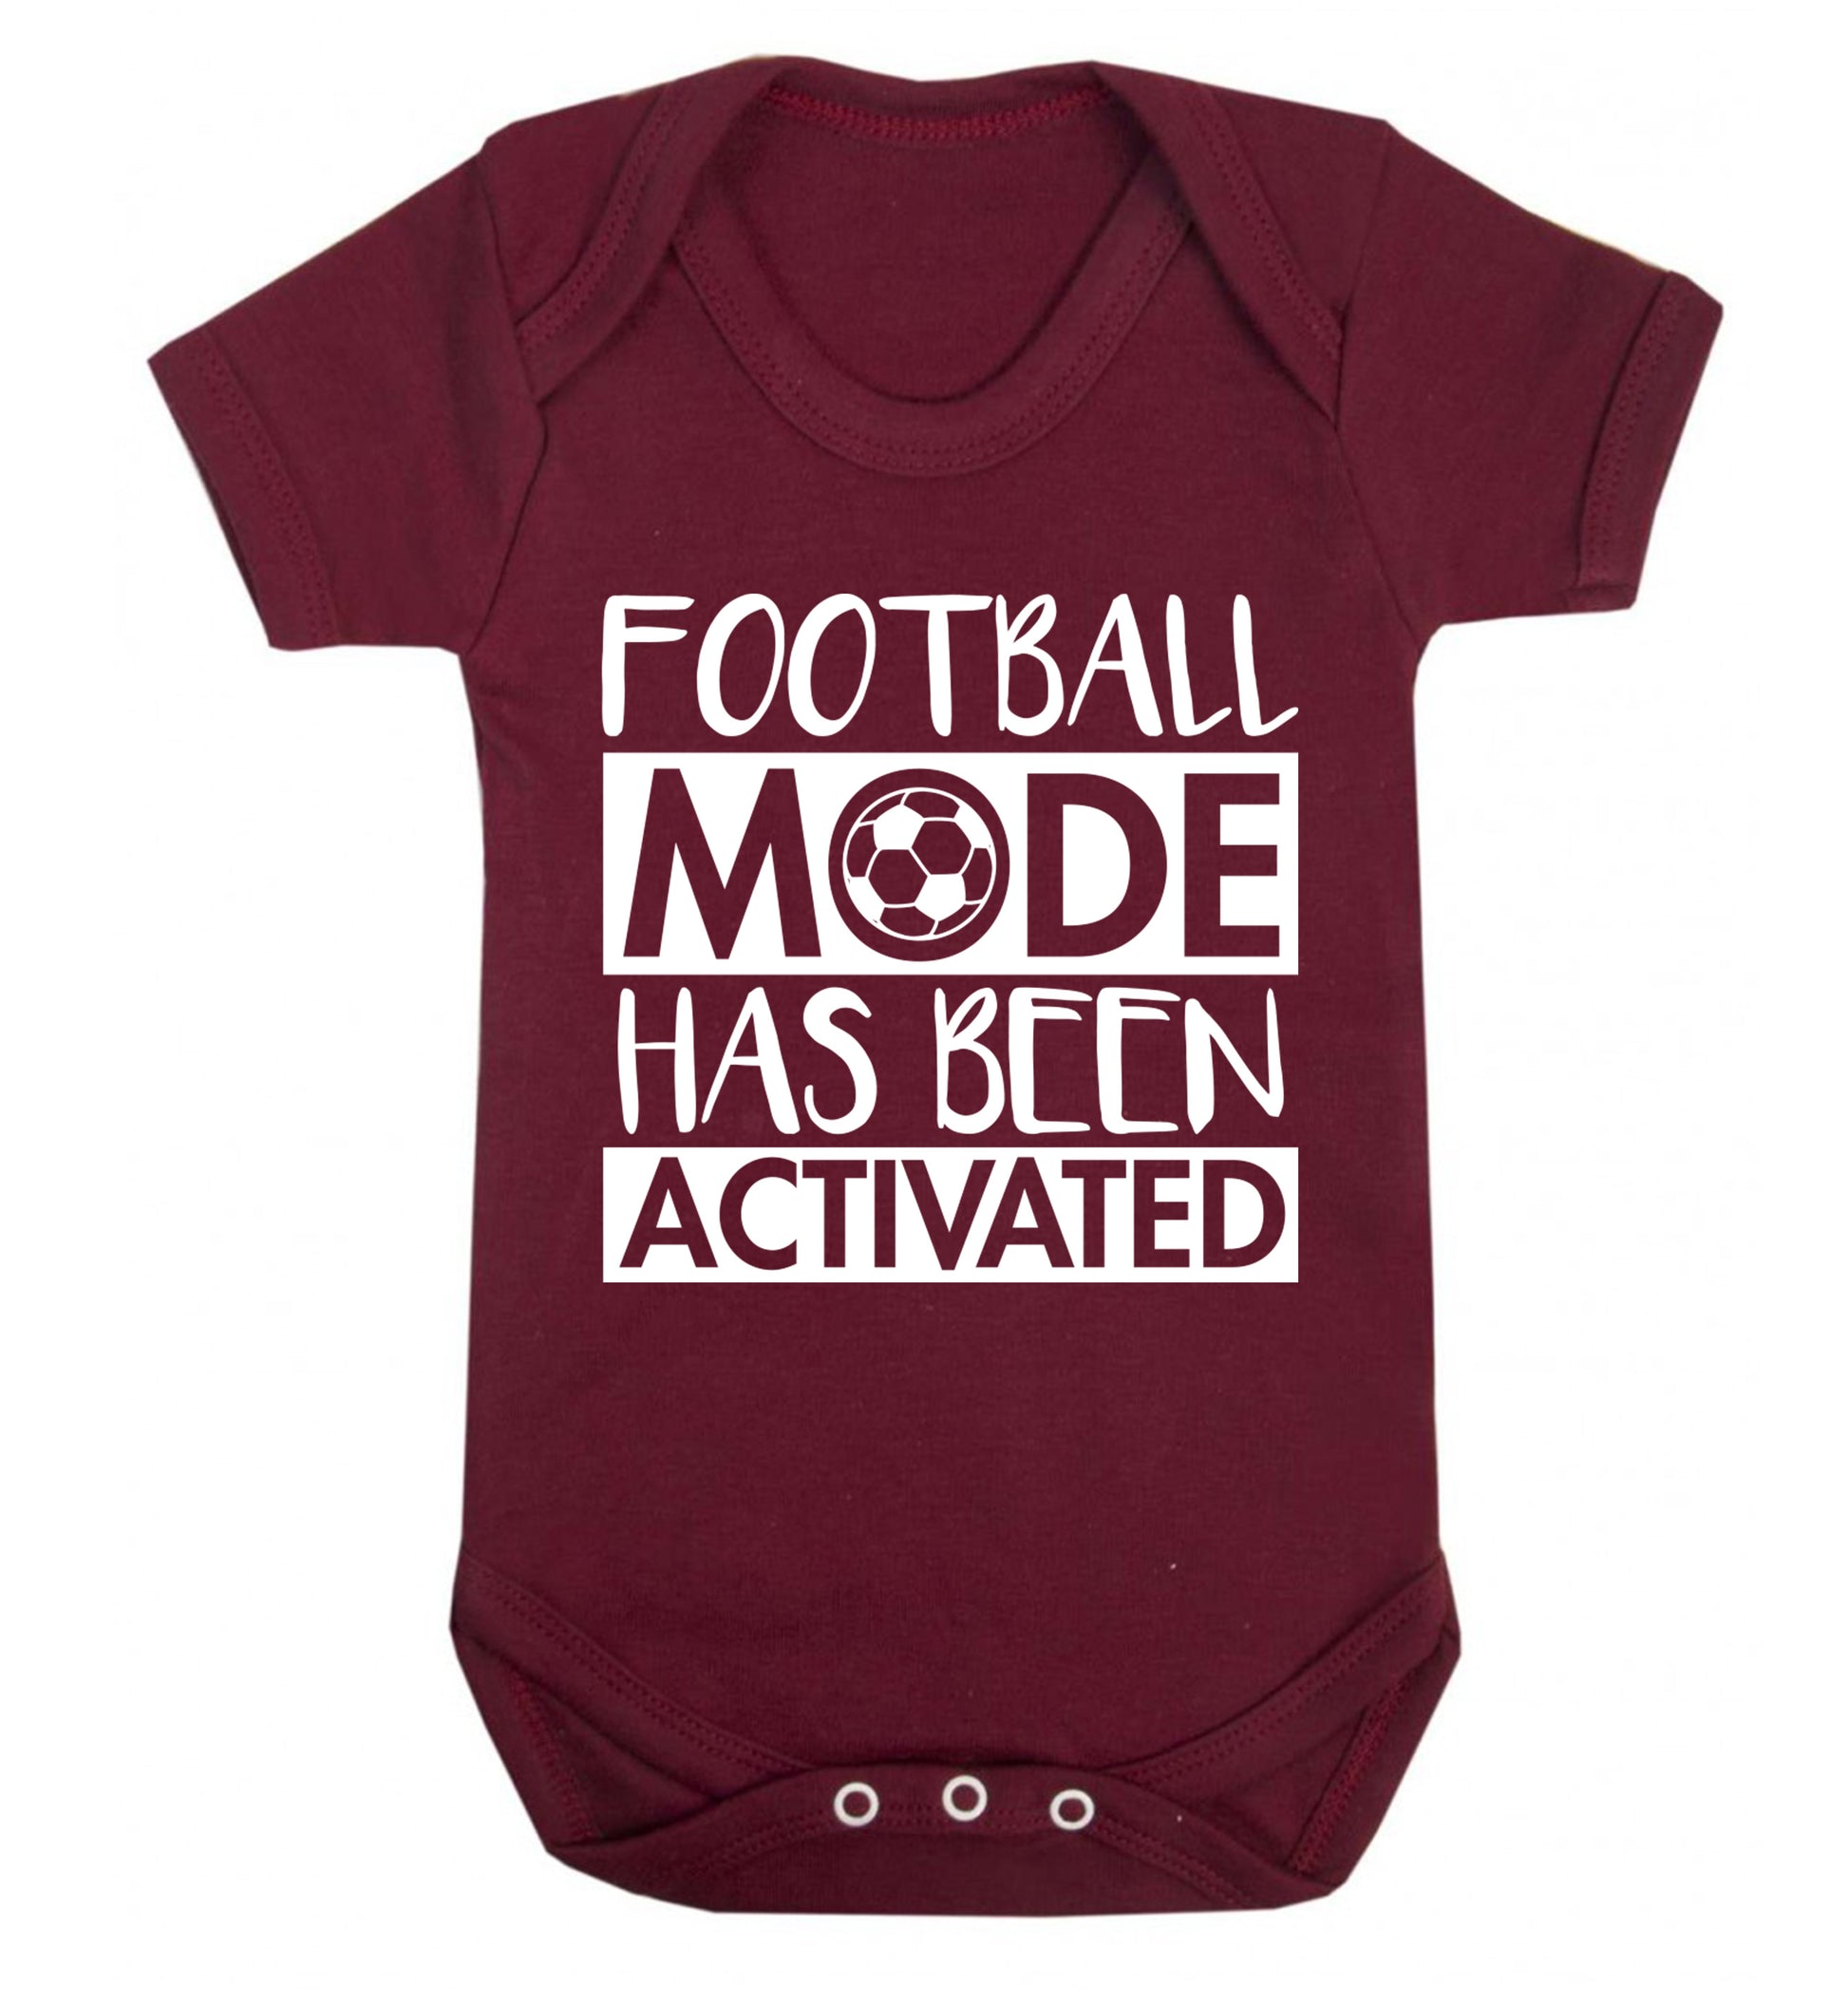 Football mode has been activated Baby Vest maroon 18-24 months